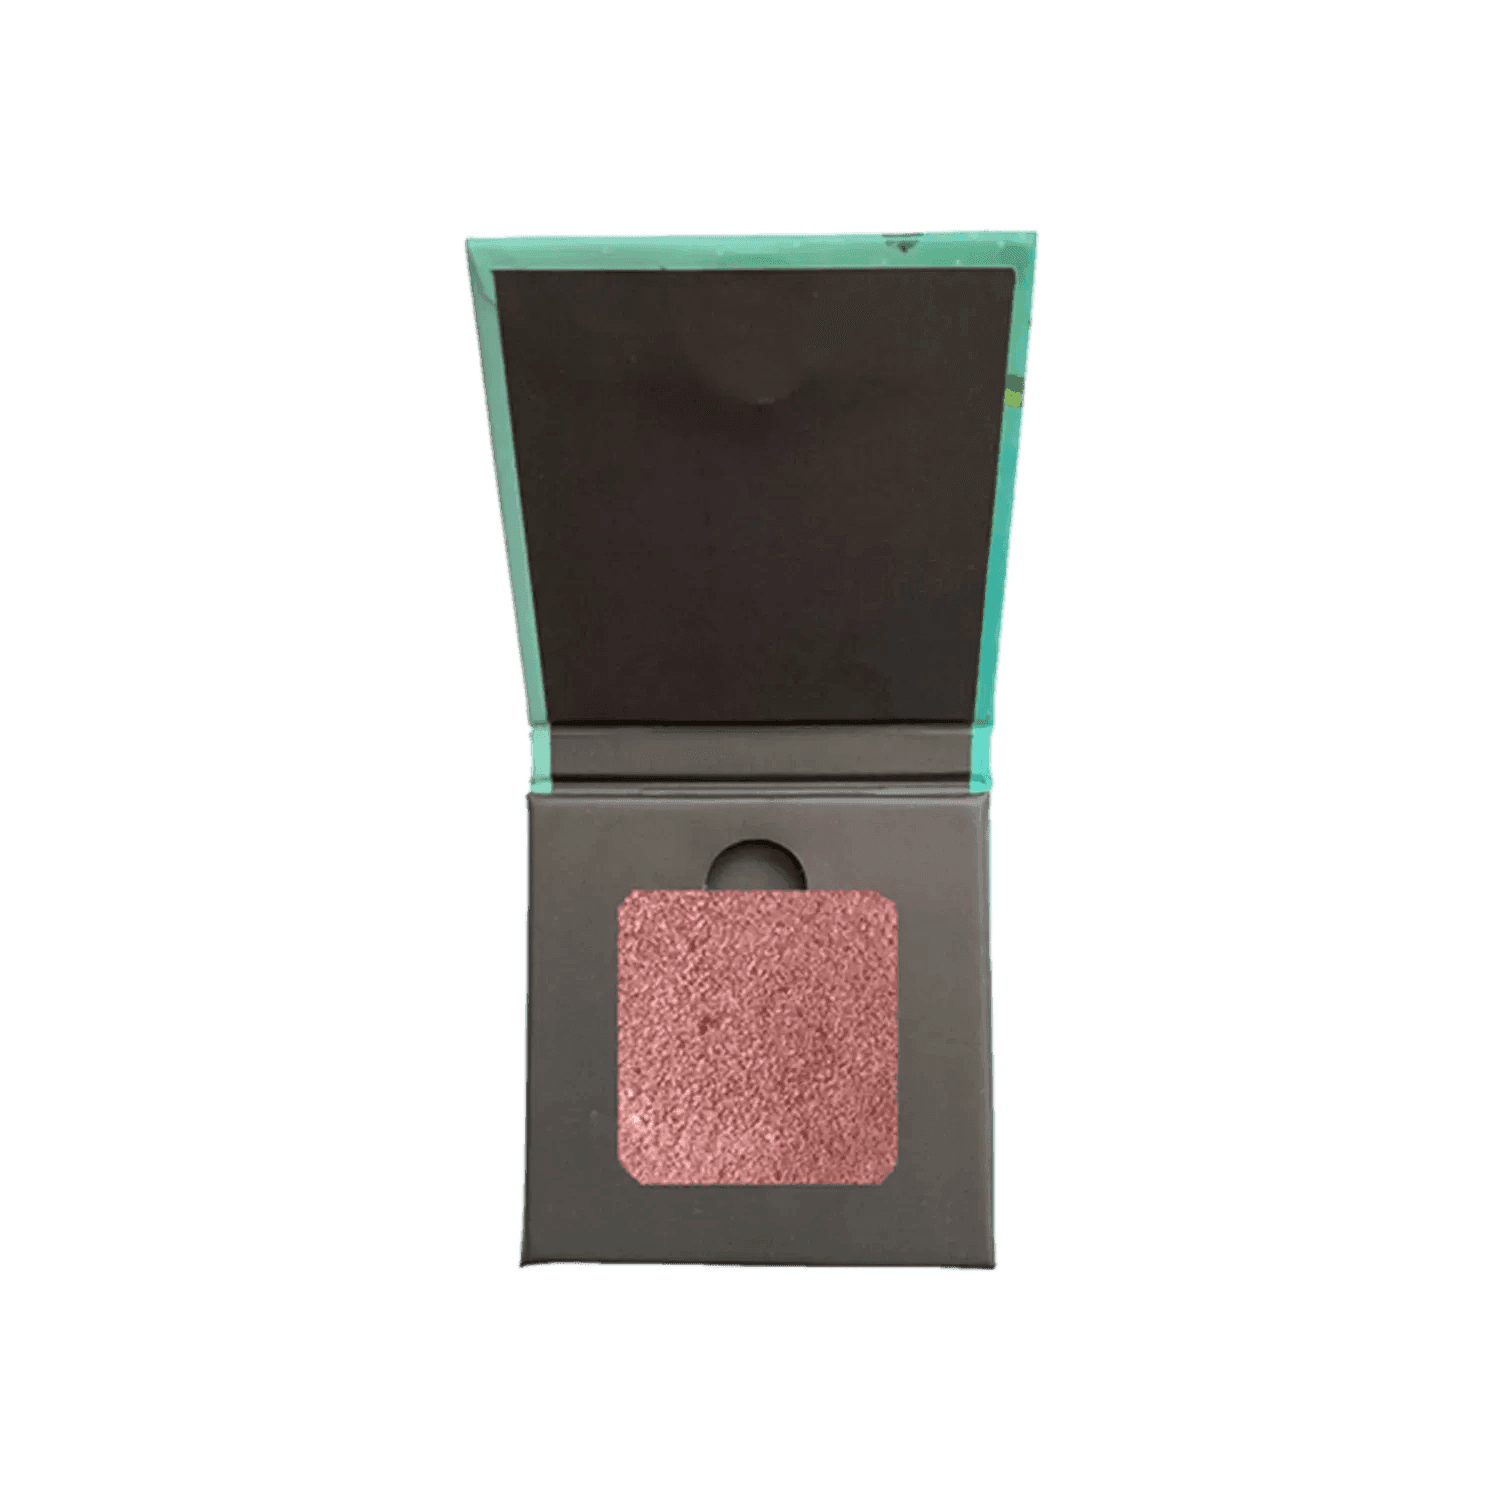 DISGUISE Satin Smooth Eyeshadow Squares - 206 Shimmer Pink Autumn (4.5g)